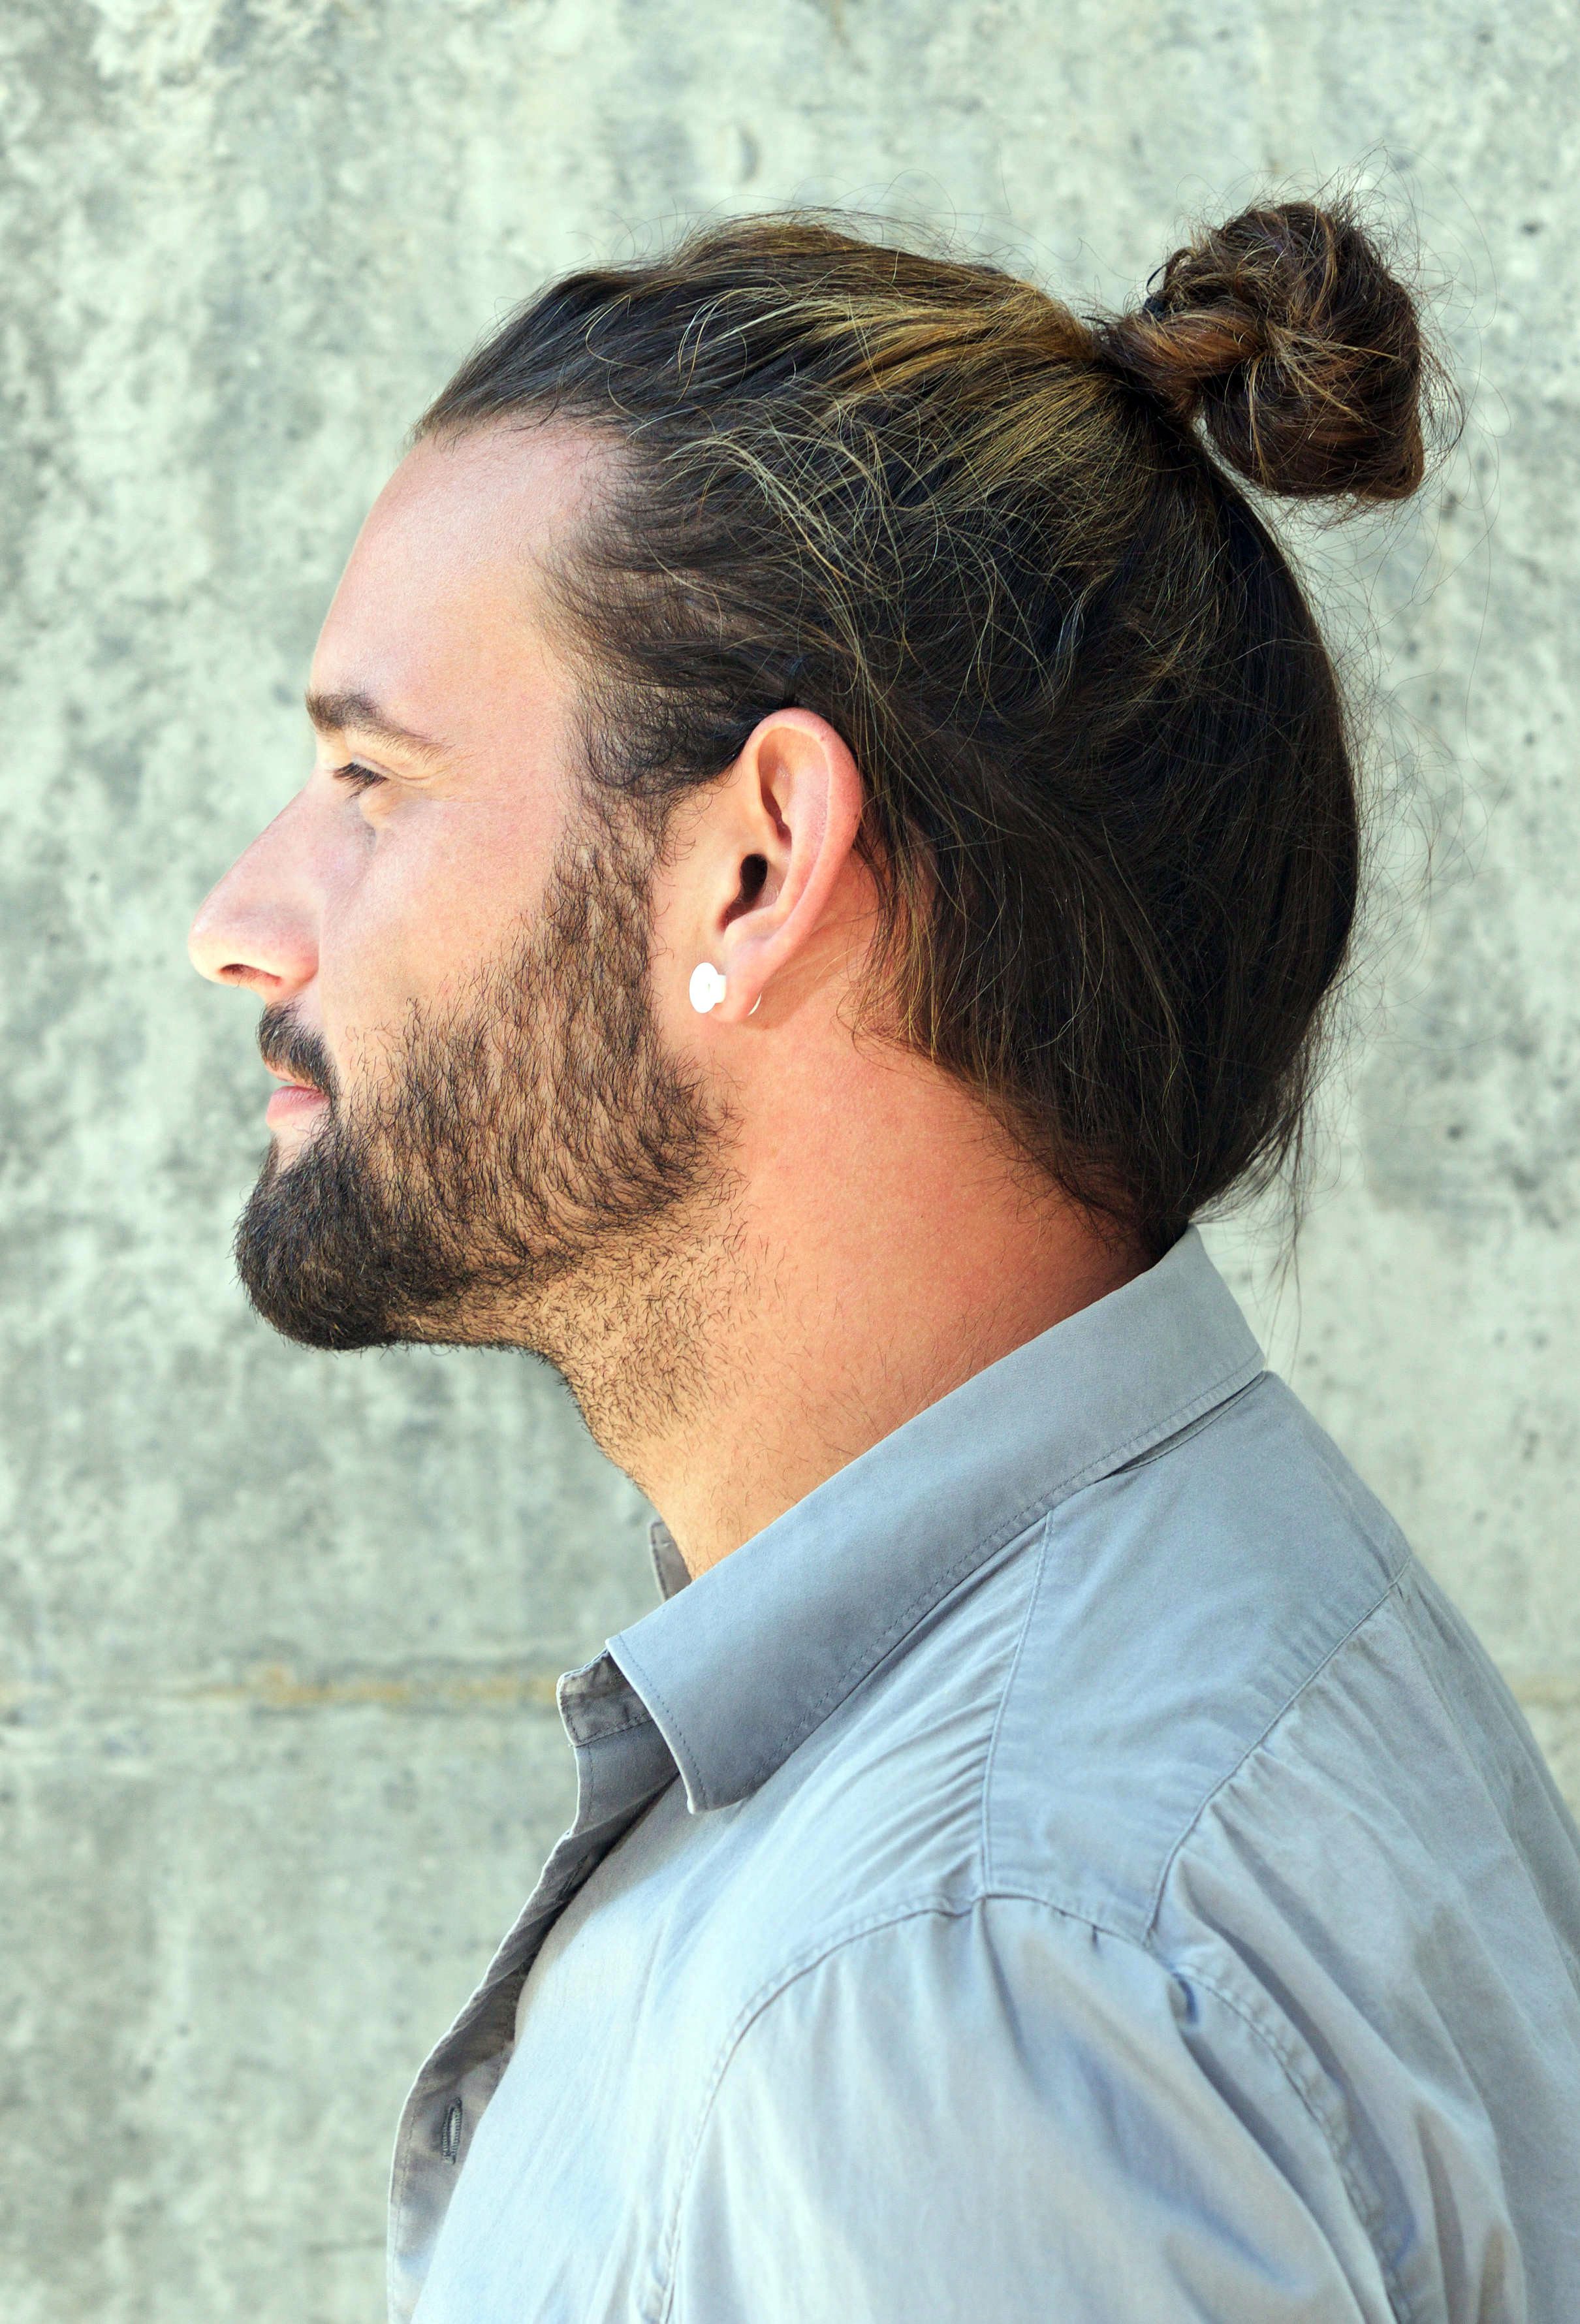 50 Best Man Bun Hairstyles to Try Out in 2022